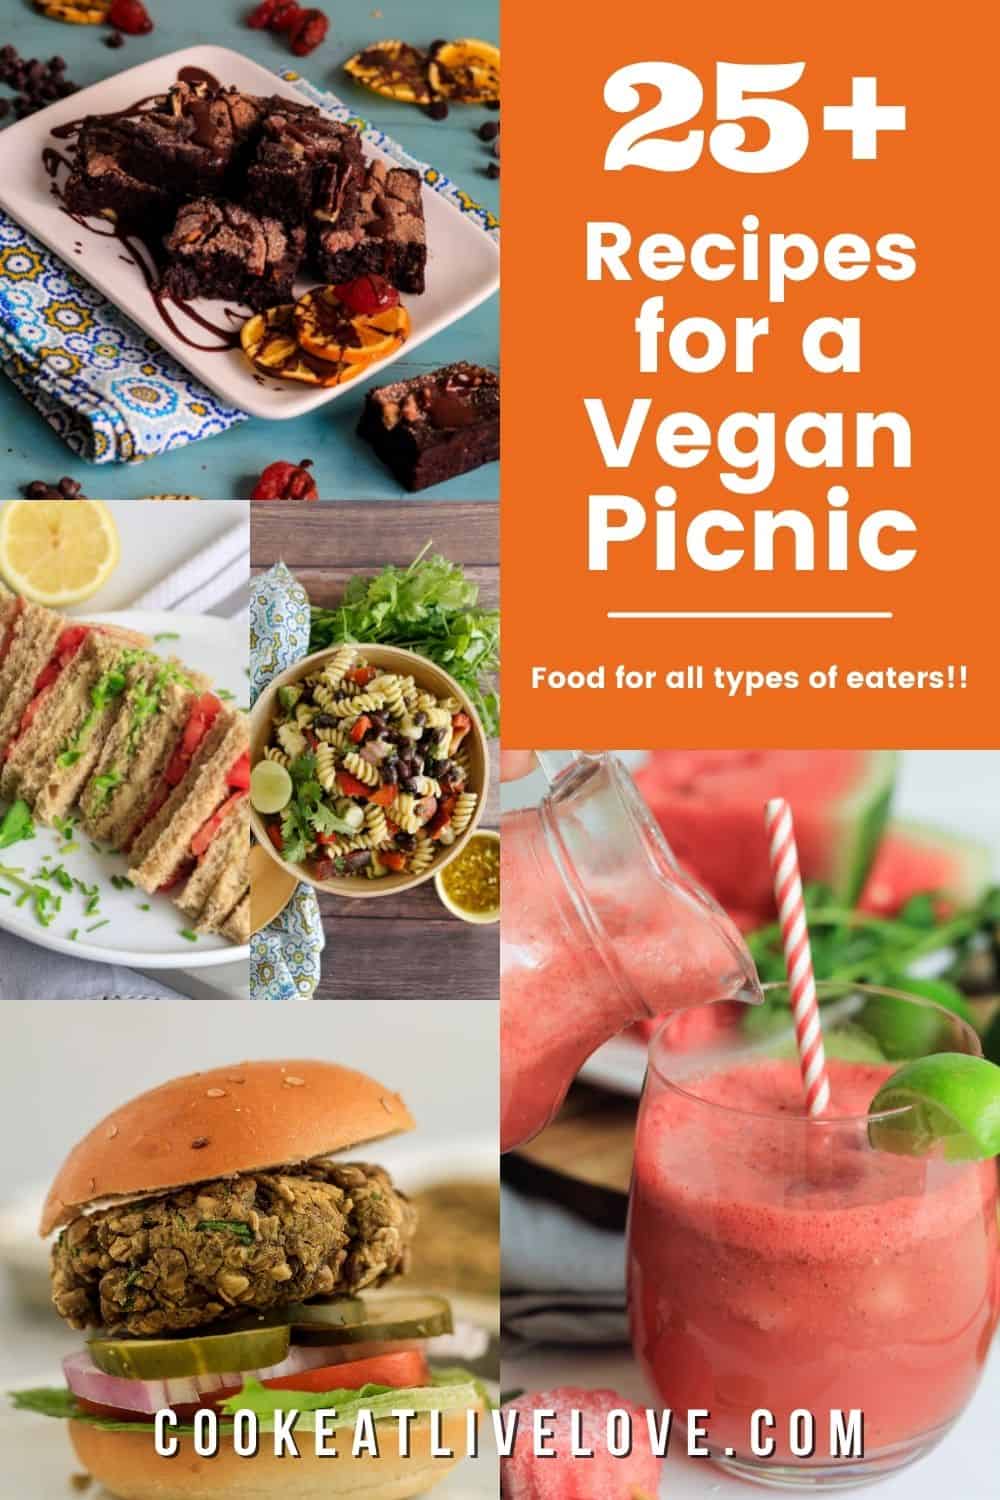 Ultimate Guide to Vegan Picnic Foods - Cook Eat Live Love